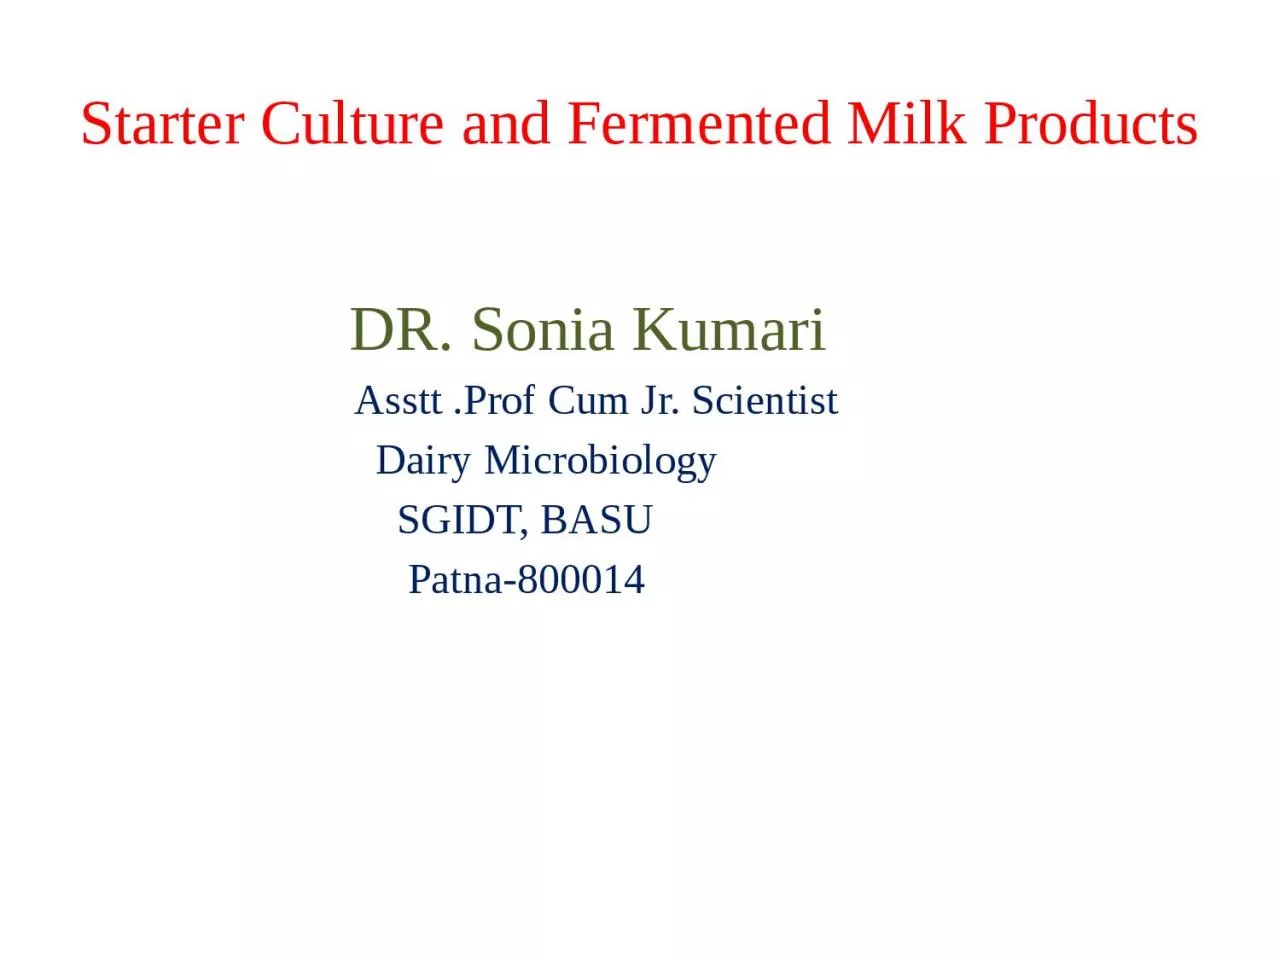 Starter Culture and Fermented Milk Products